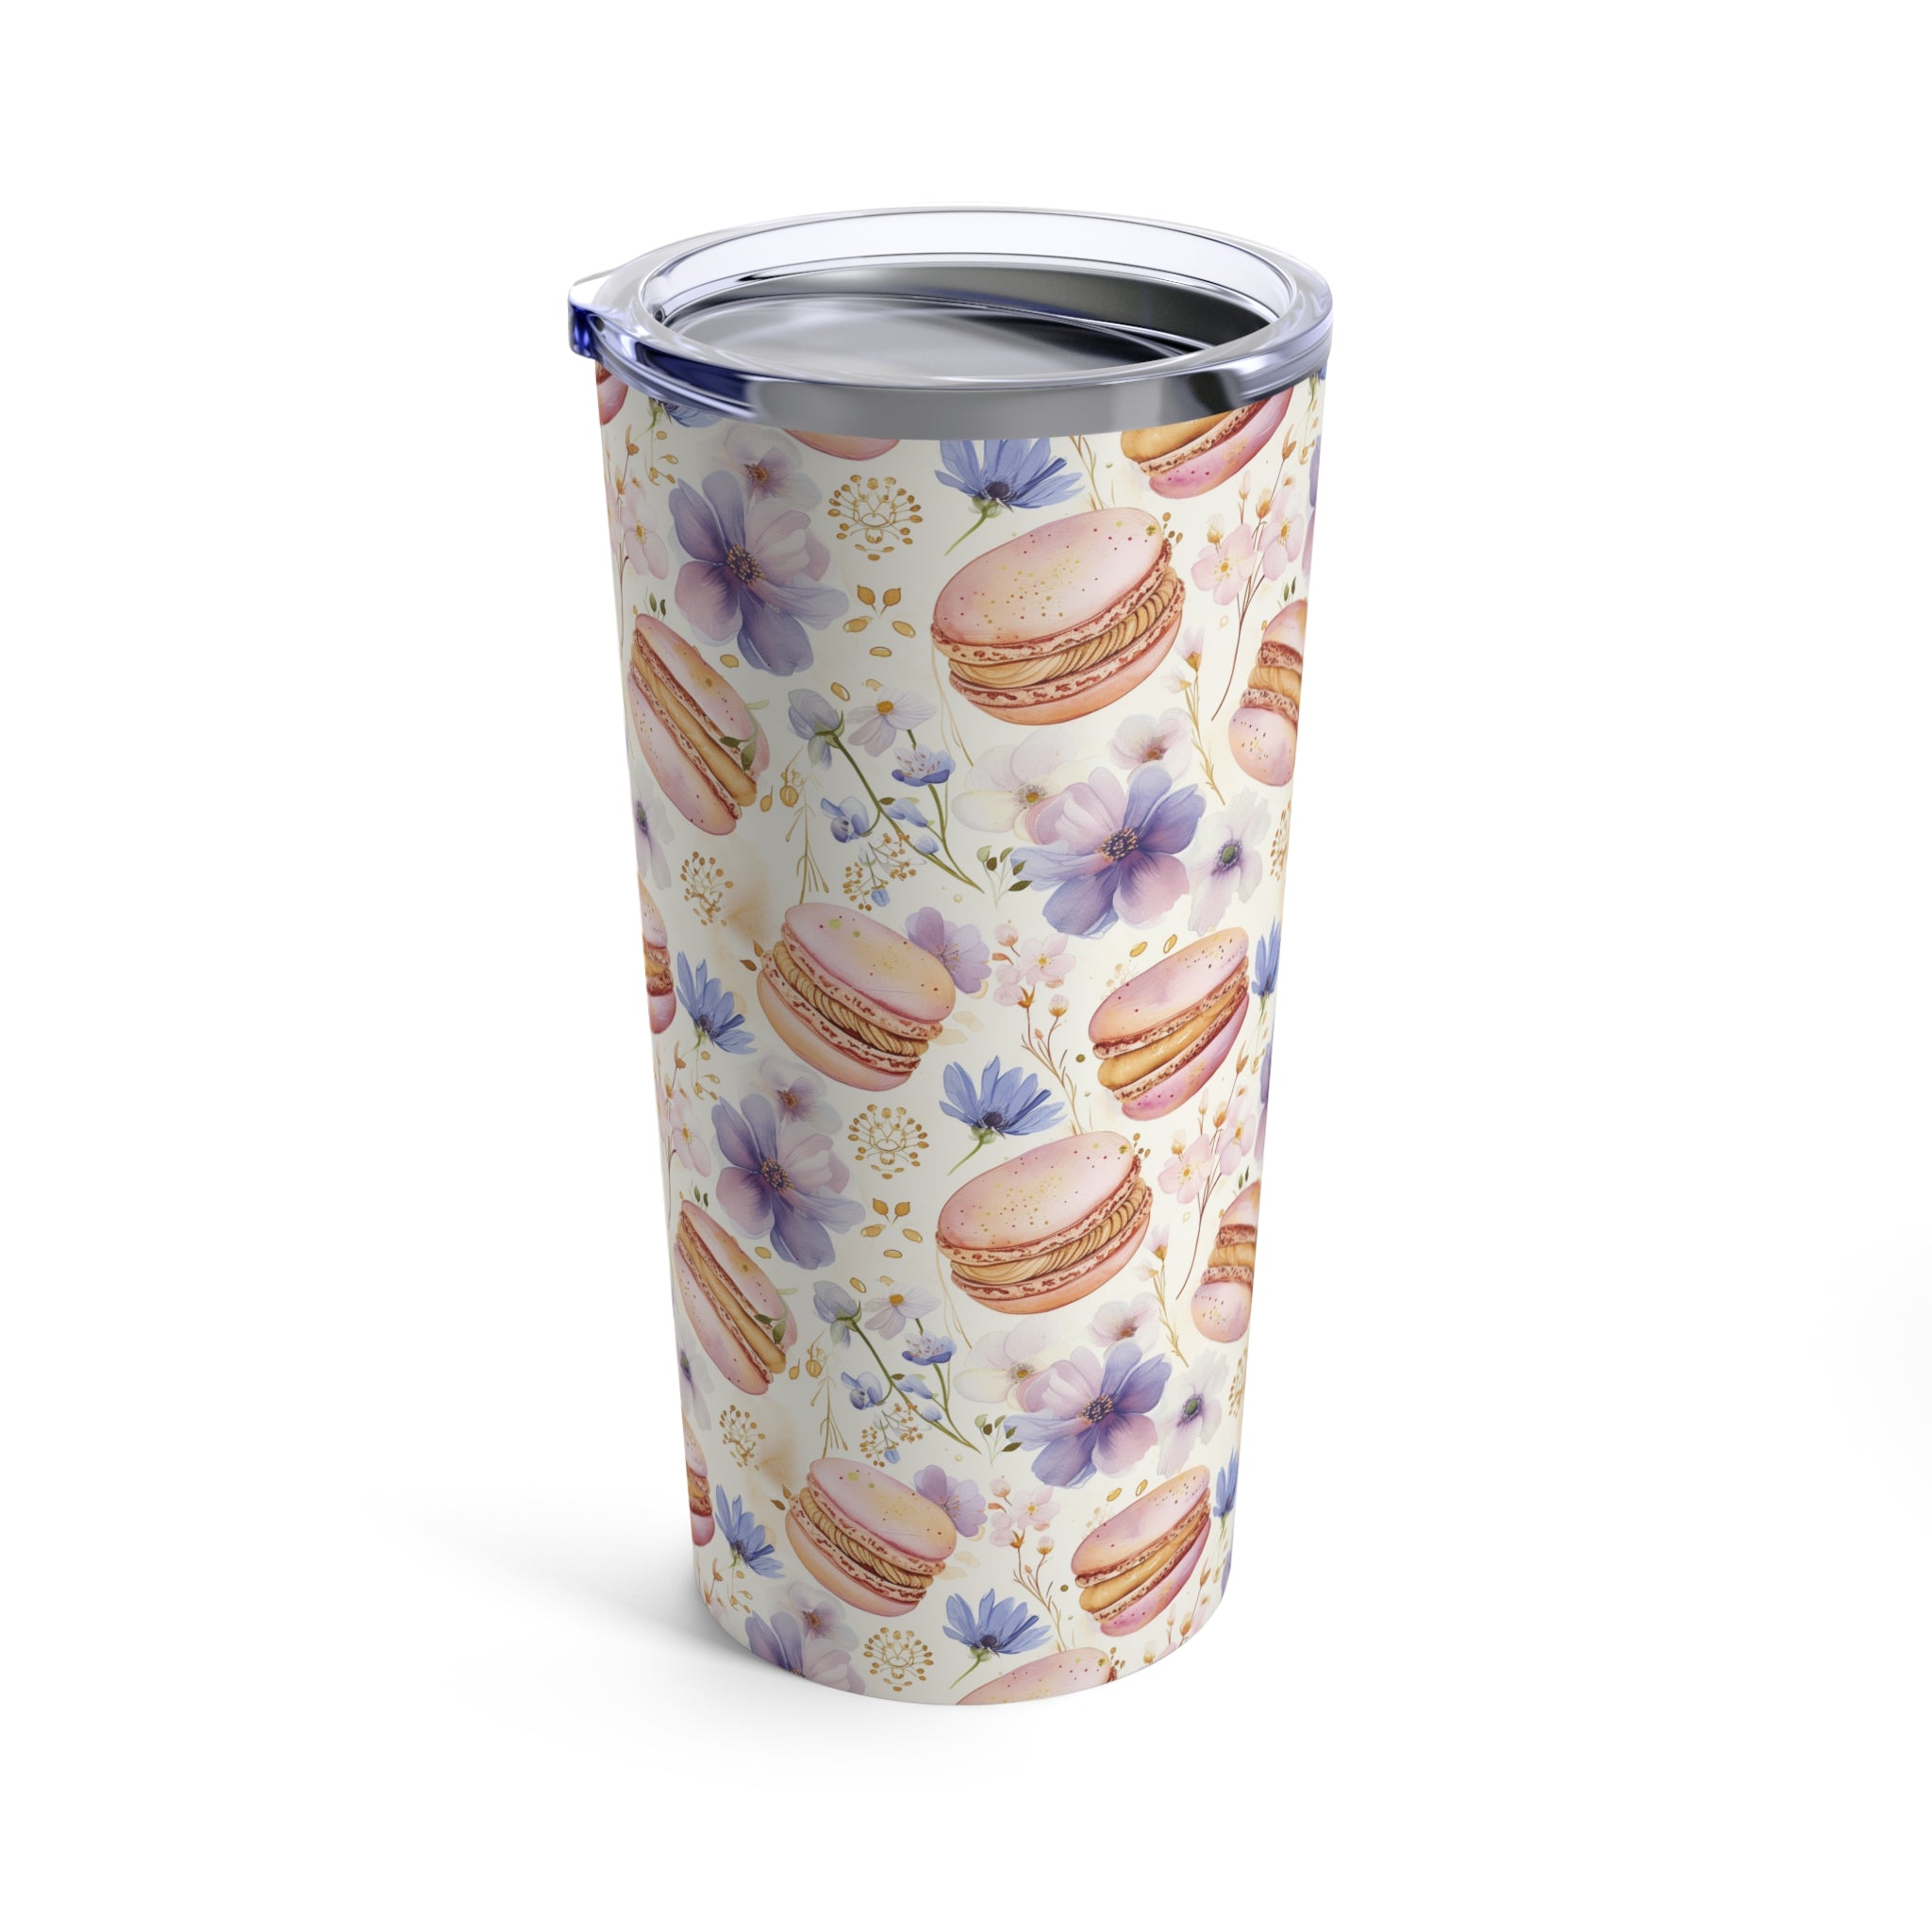 Savor the Charm: Beautiful Macaroon and Tea Party Pattern Tumbler 20oz - The Ultimate Stylish and Durable Travel Cup for Enjoying Hot and Cold Beverages On-The-Go or While Relaxing With Friends and Family